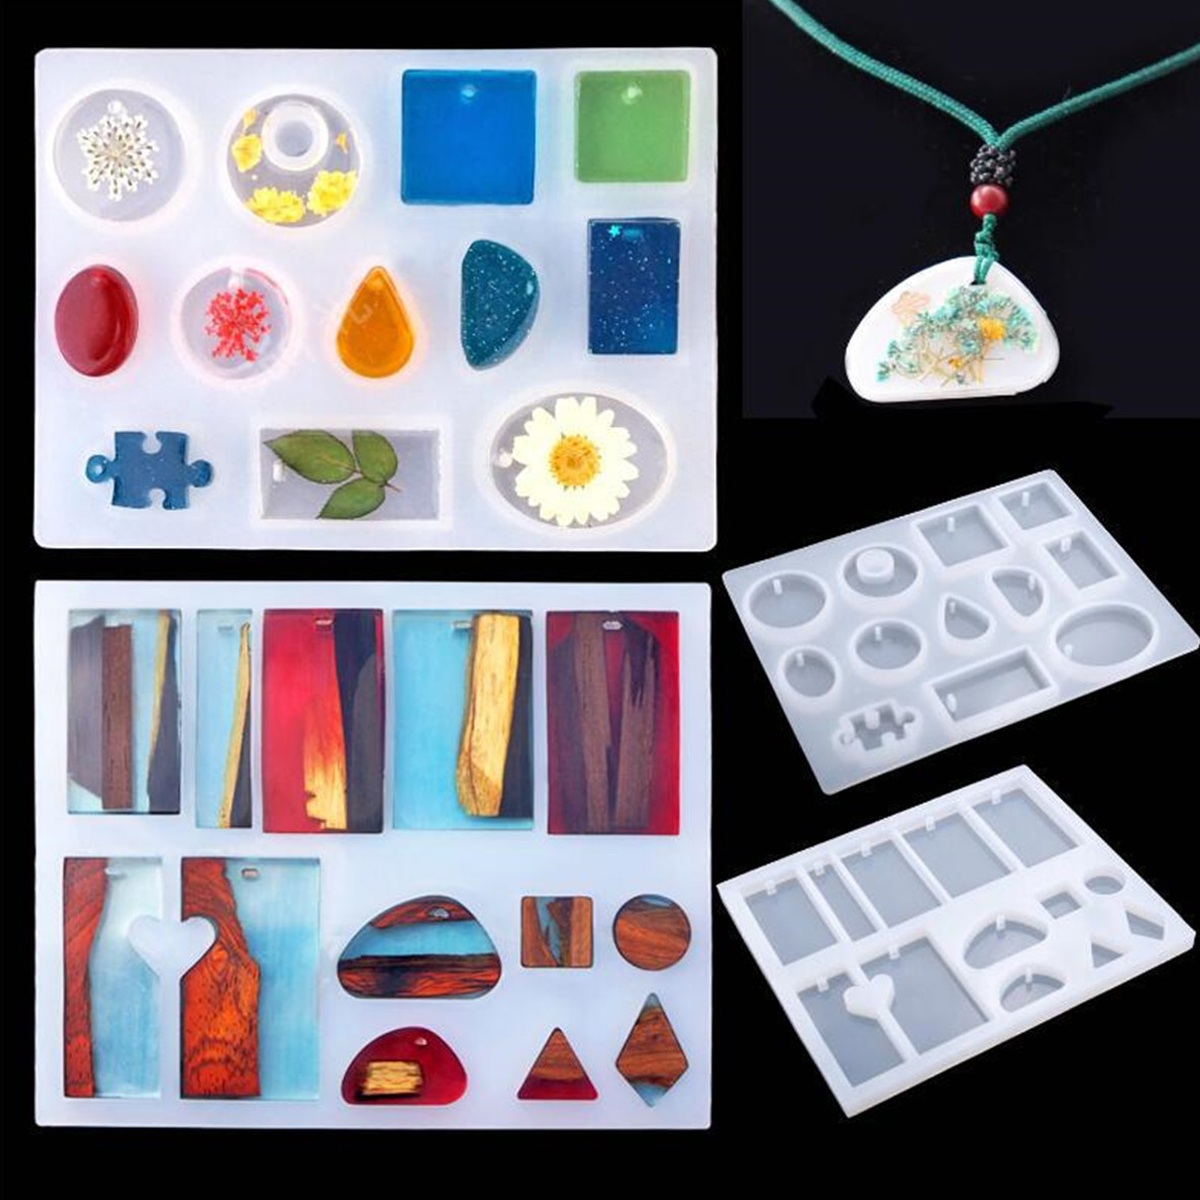 83x-Silicone-Resin-Casting-Mold-Tool-Sets-Kit-DIY-Pendant-Jewelry-Bracelet-Making-1808640-2